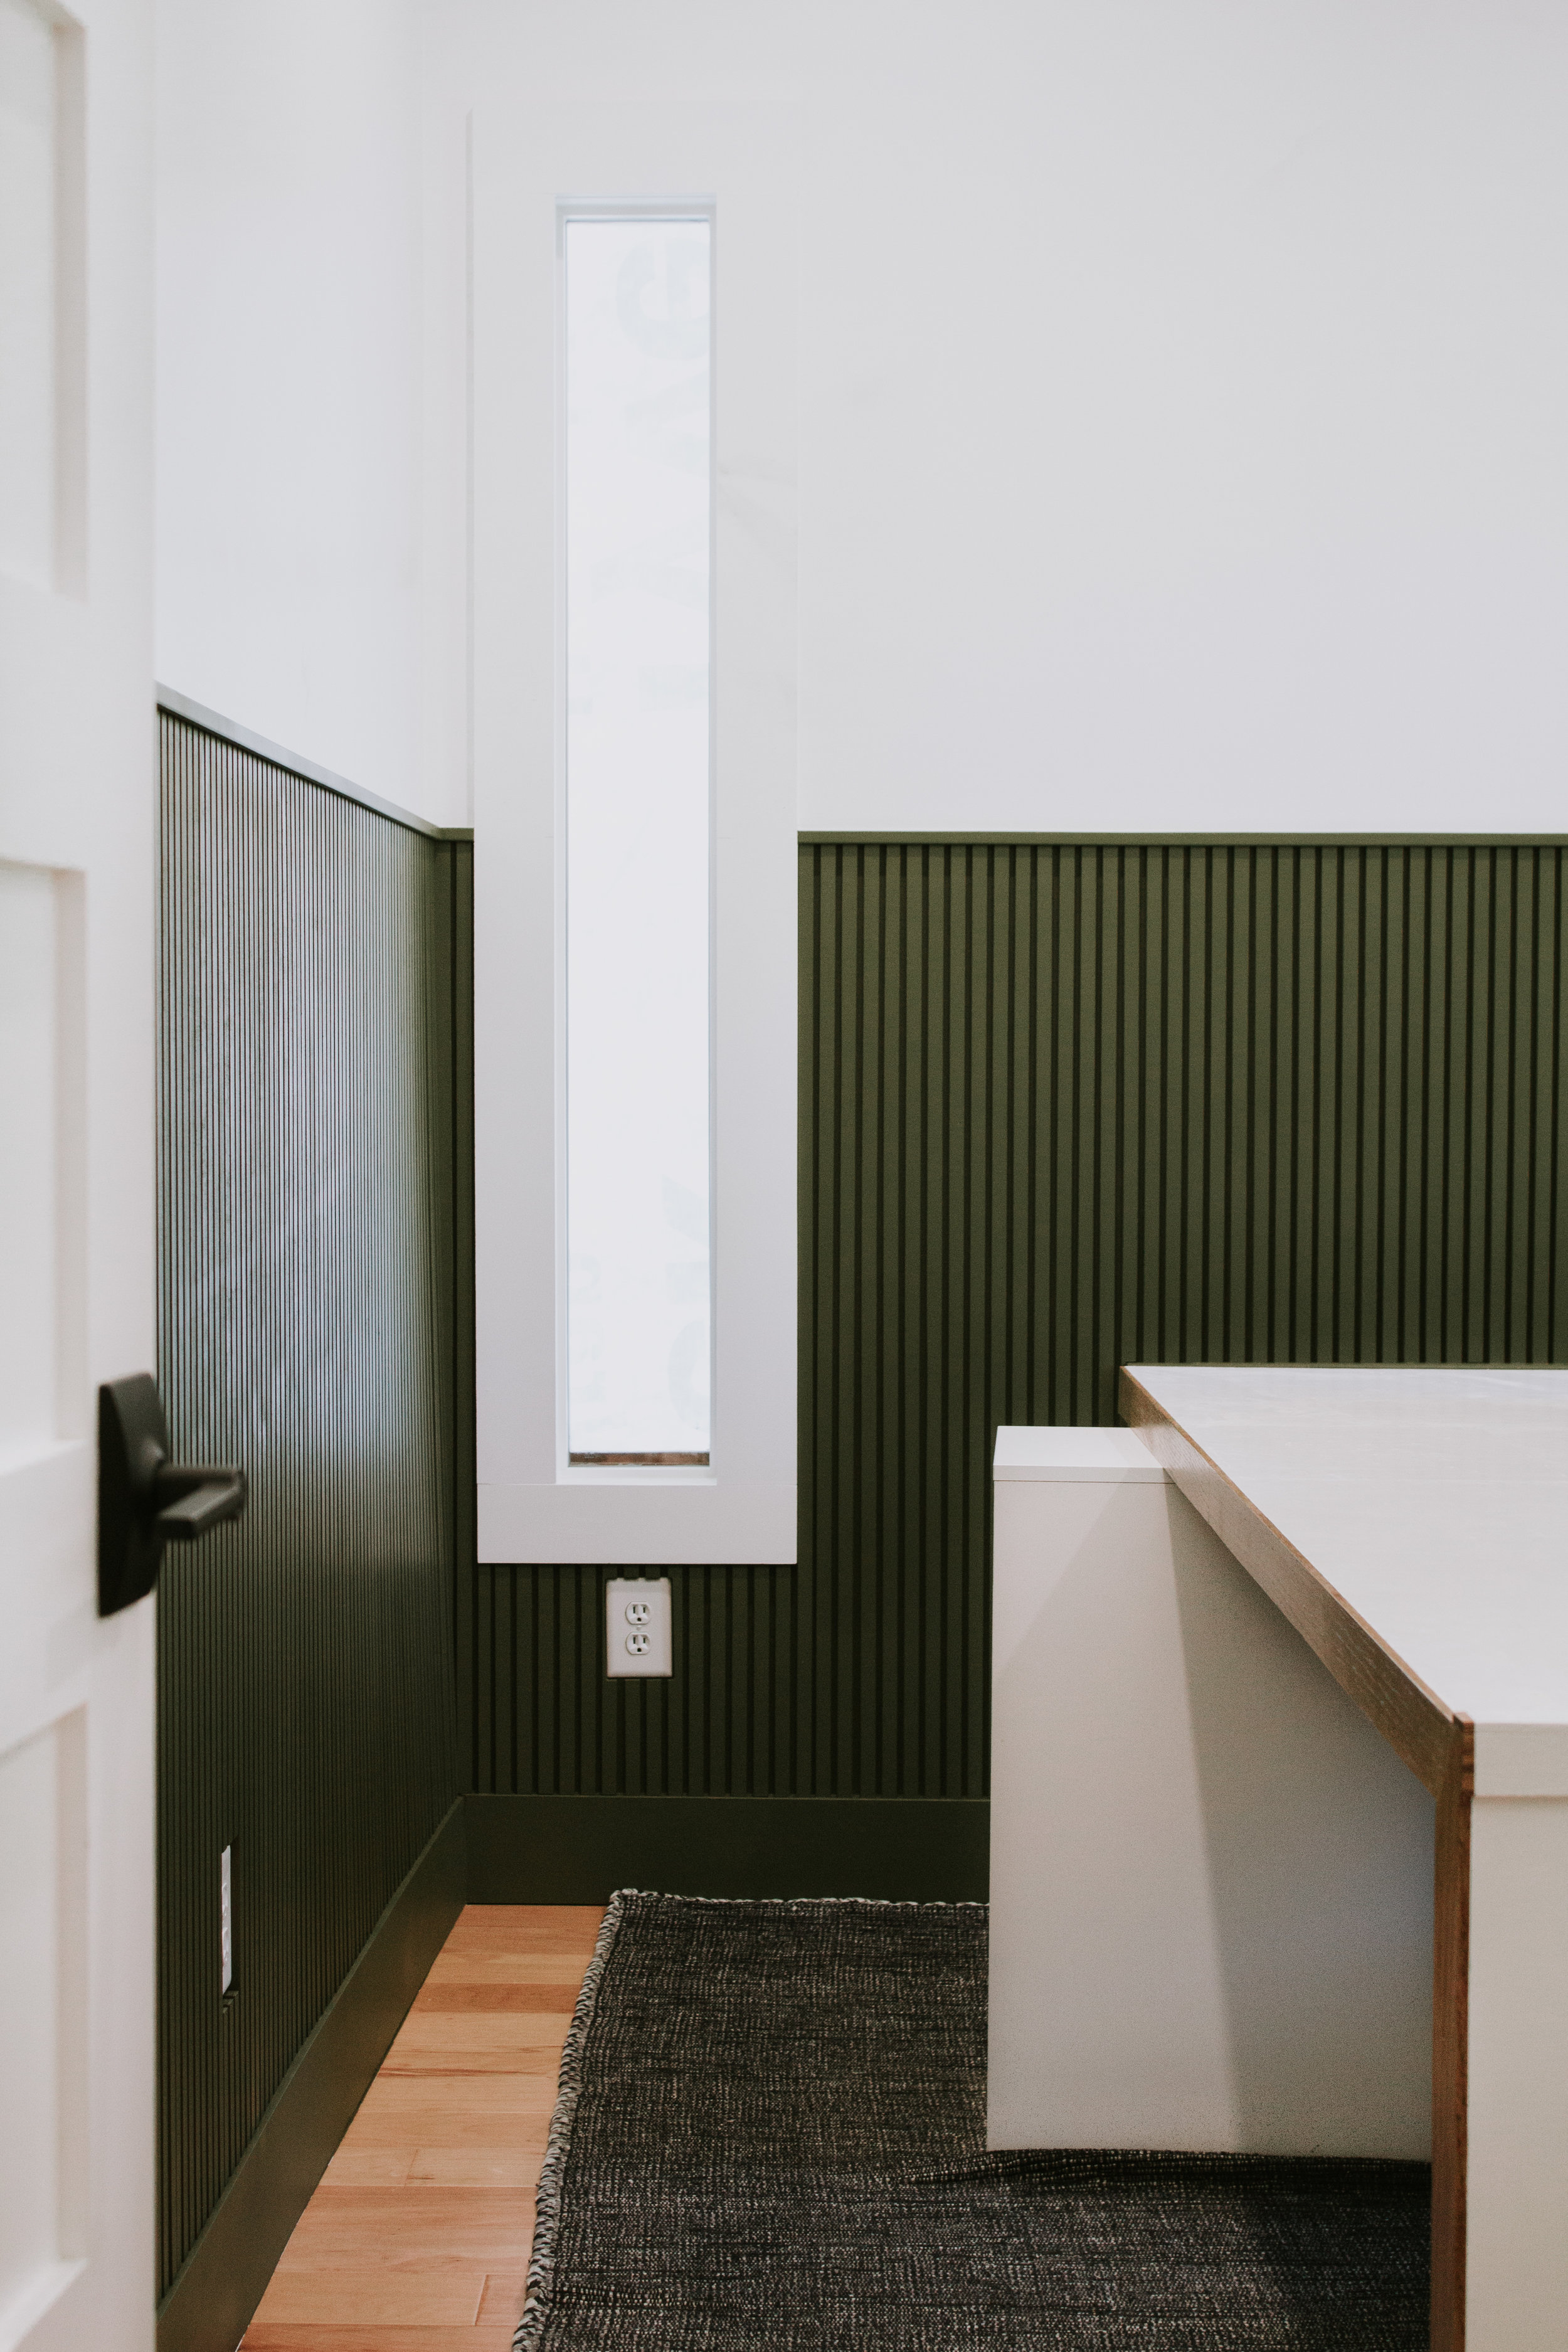 Installing modern wainscoting in our home office. Office makeover by Nadine Stay. Vertical slats painted in a rich hunter green. Full tutorial - how to install modern wainscoting in your home.